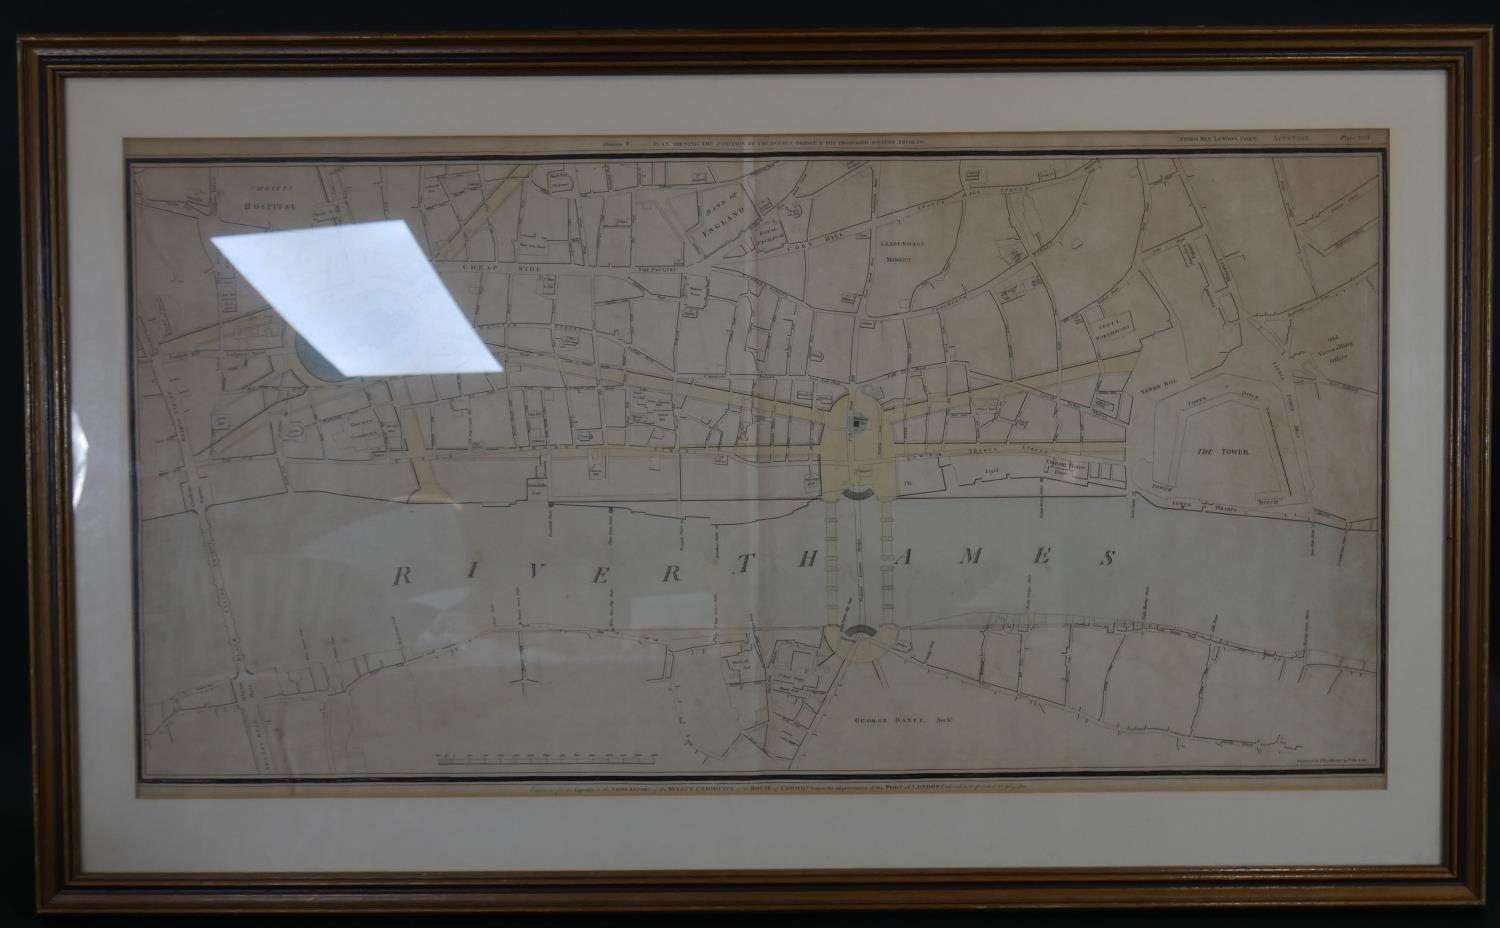 A framed and glazed antique architect's map showing 'The Plan of the Proposed Double Bridge and - Image 2 of 8